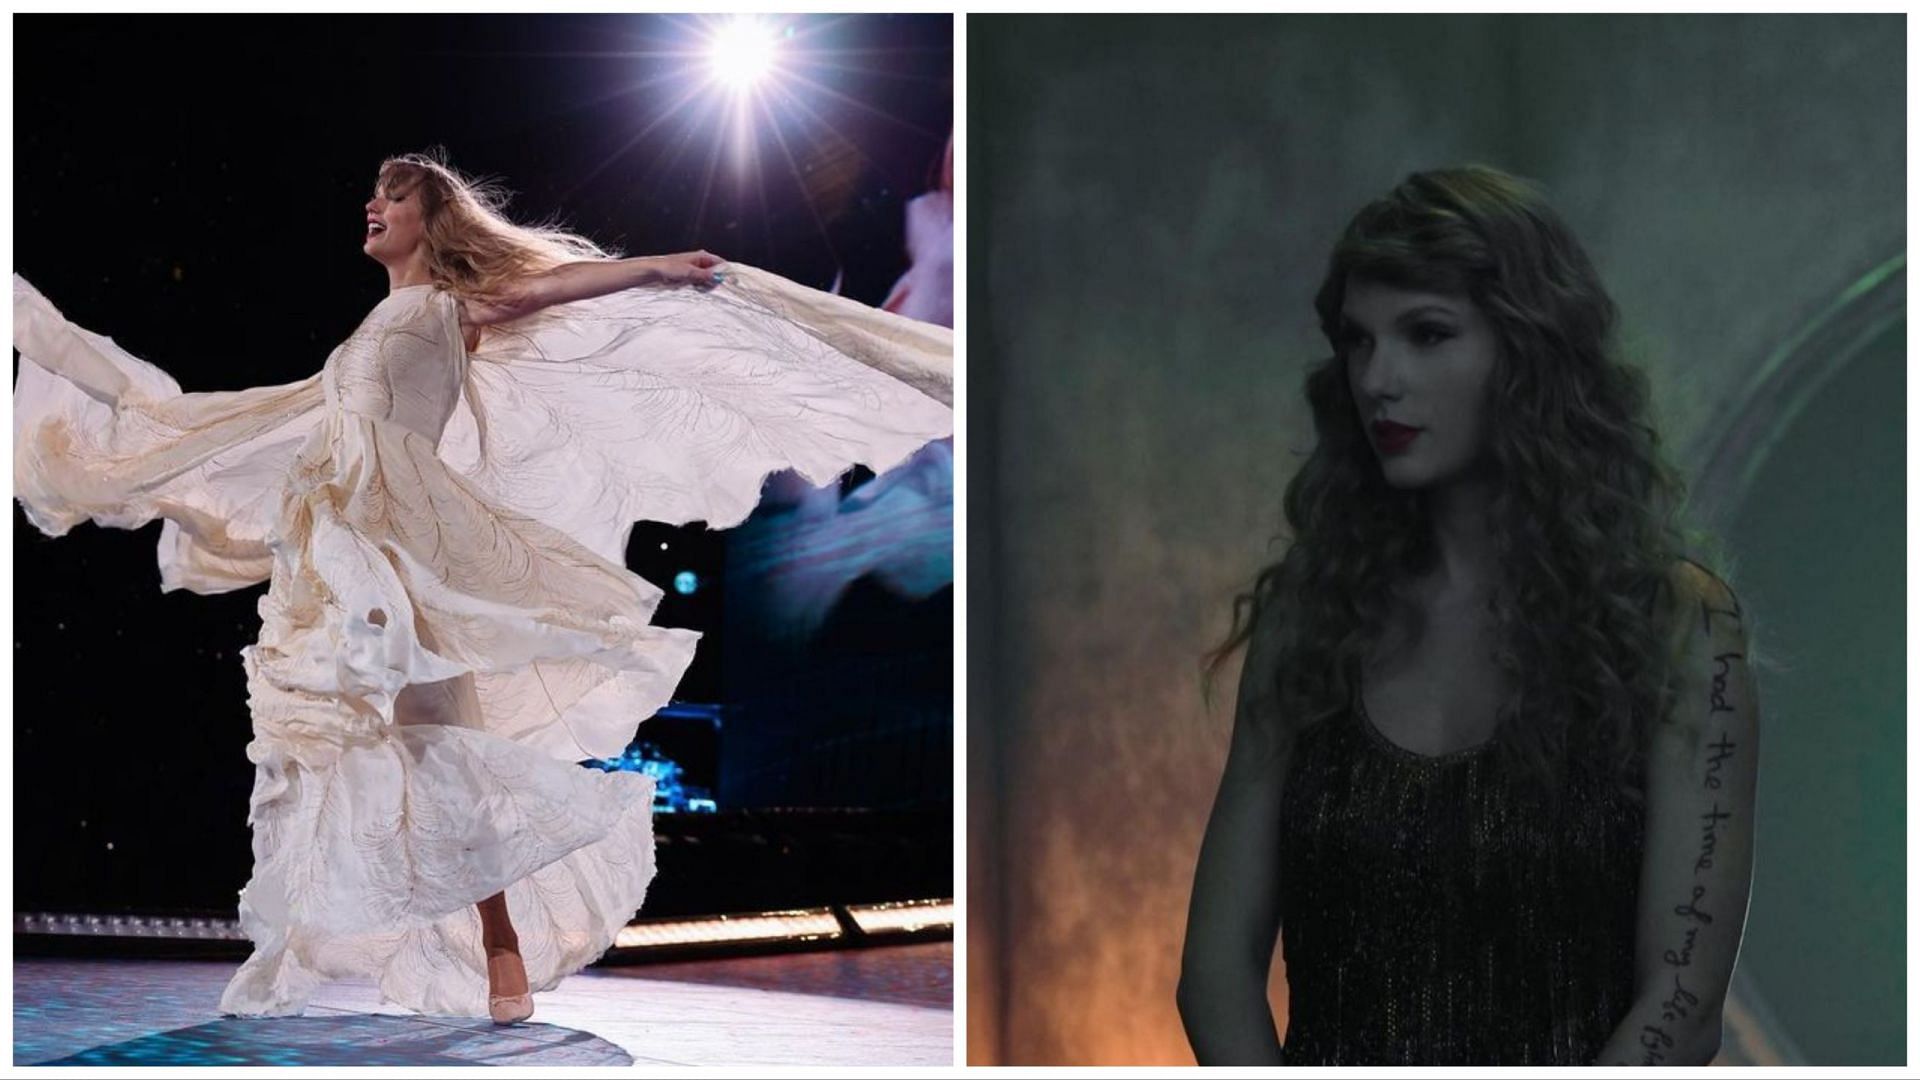 Why Did Taylor Swift Cut Songs from the Eras Tour Concert Movie?